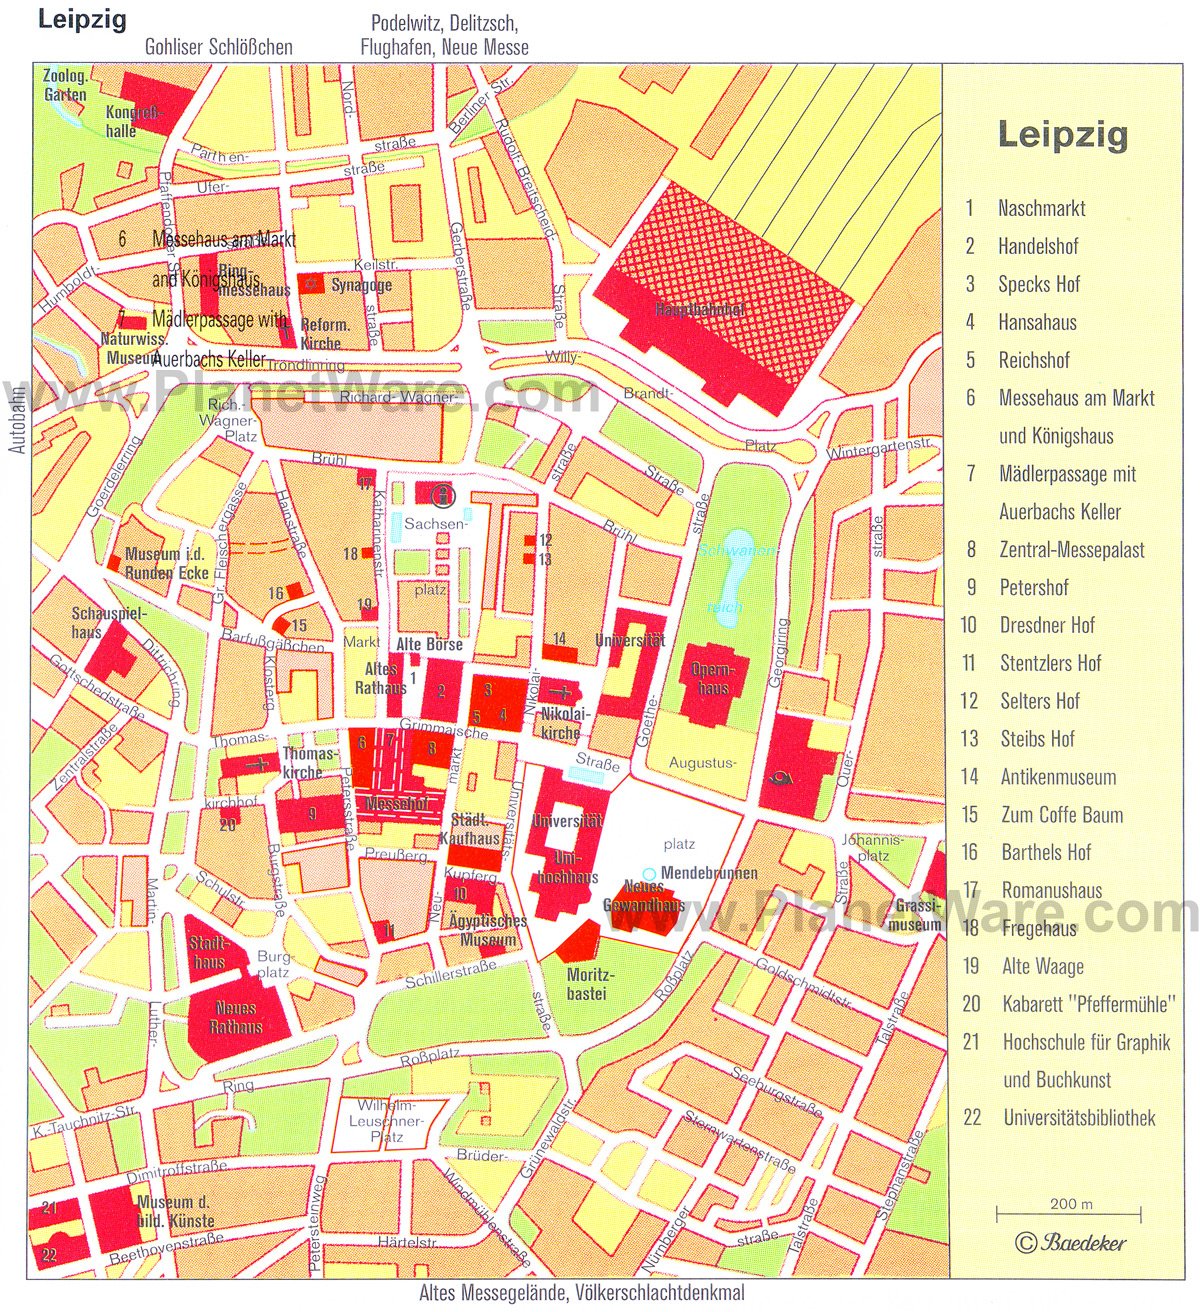 14 Top-Rated Tourist Attractions in Leipzig | PlanetWare